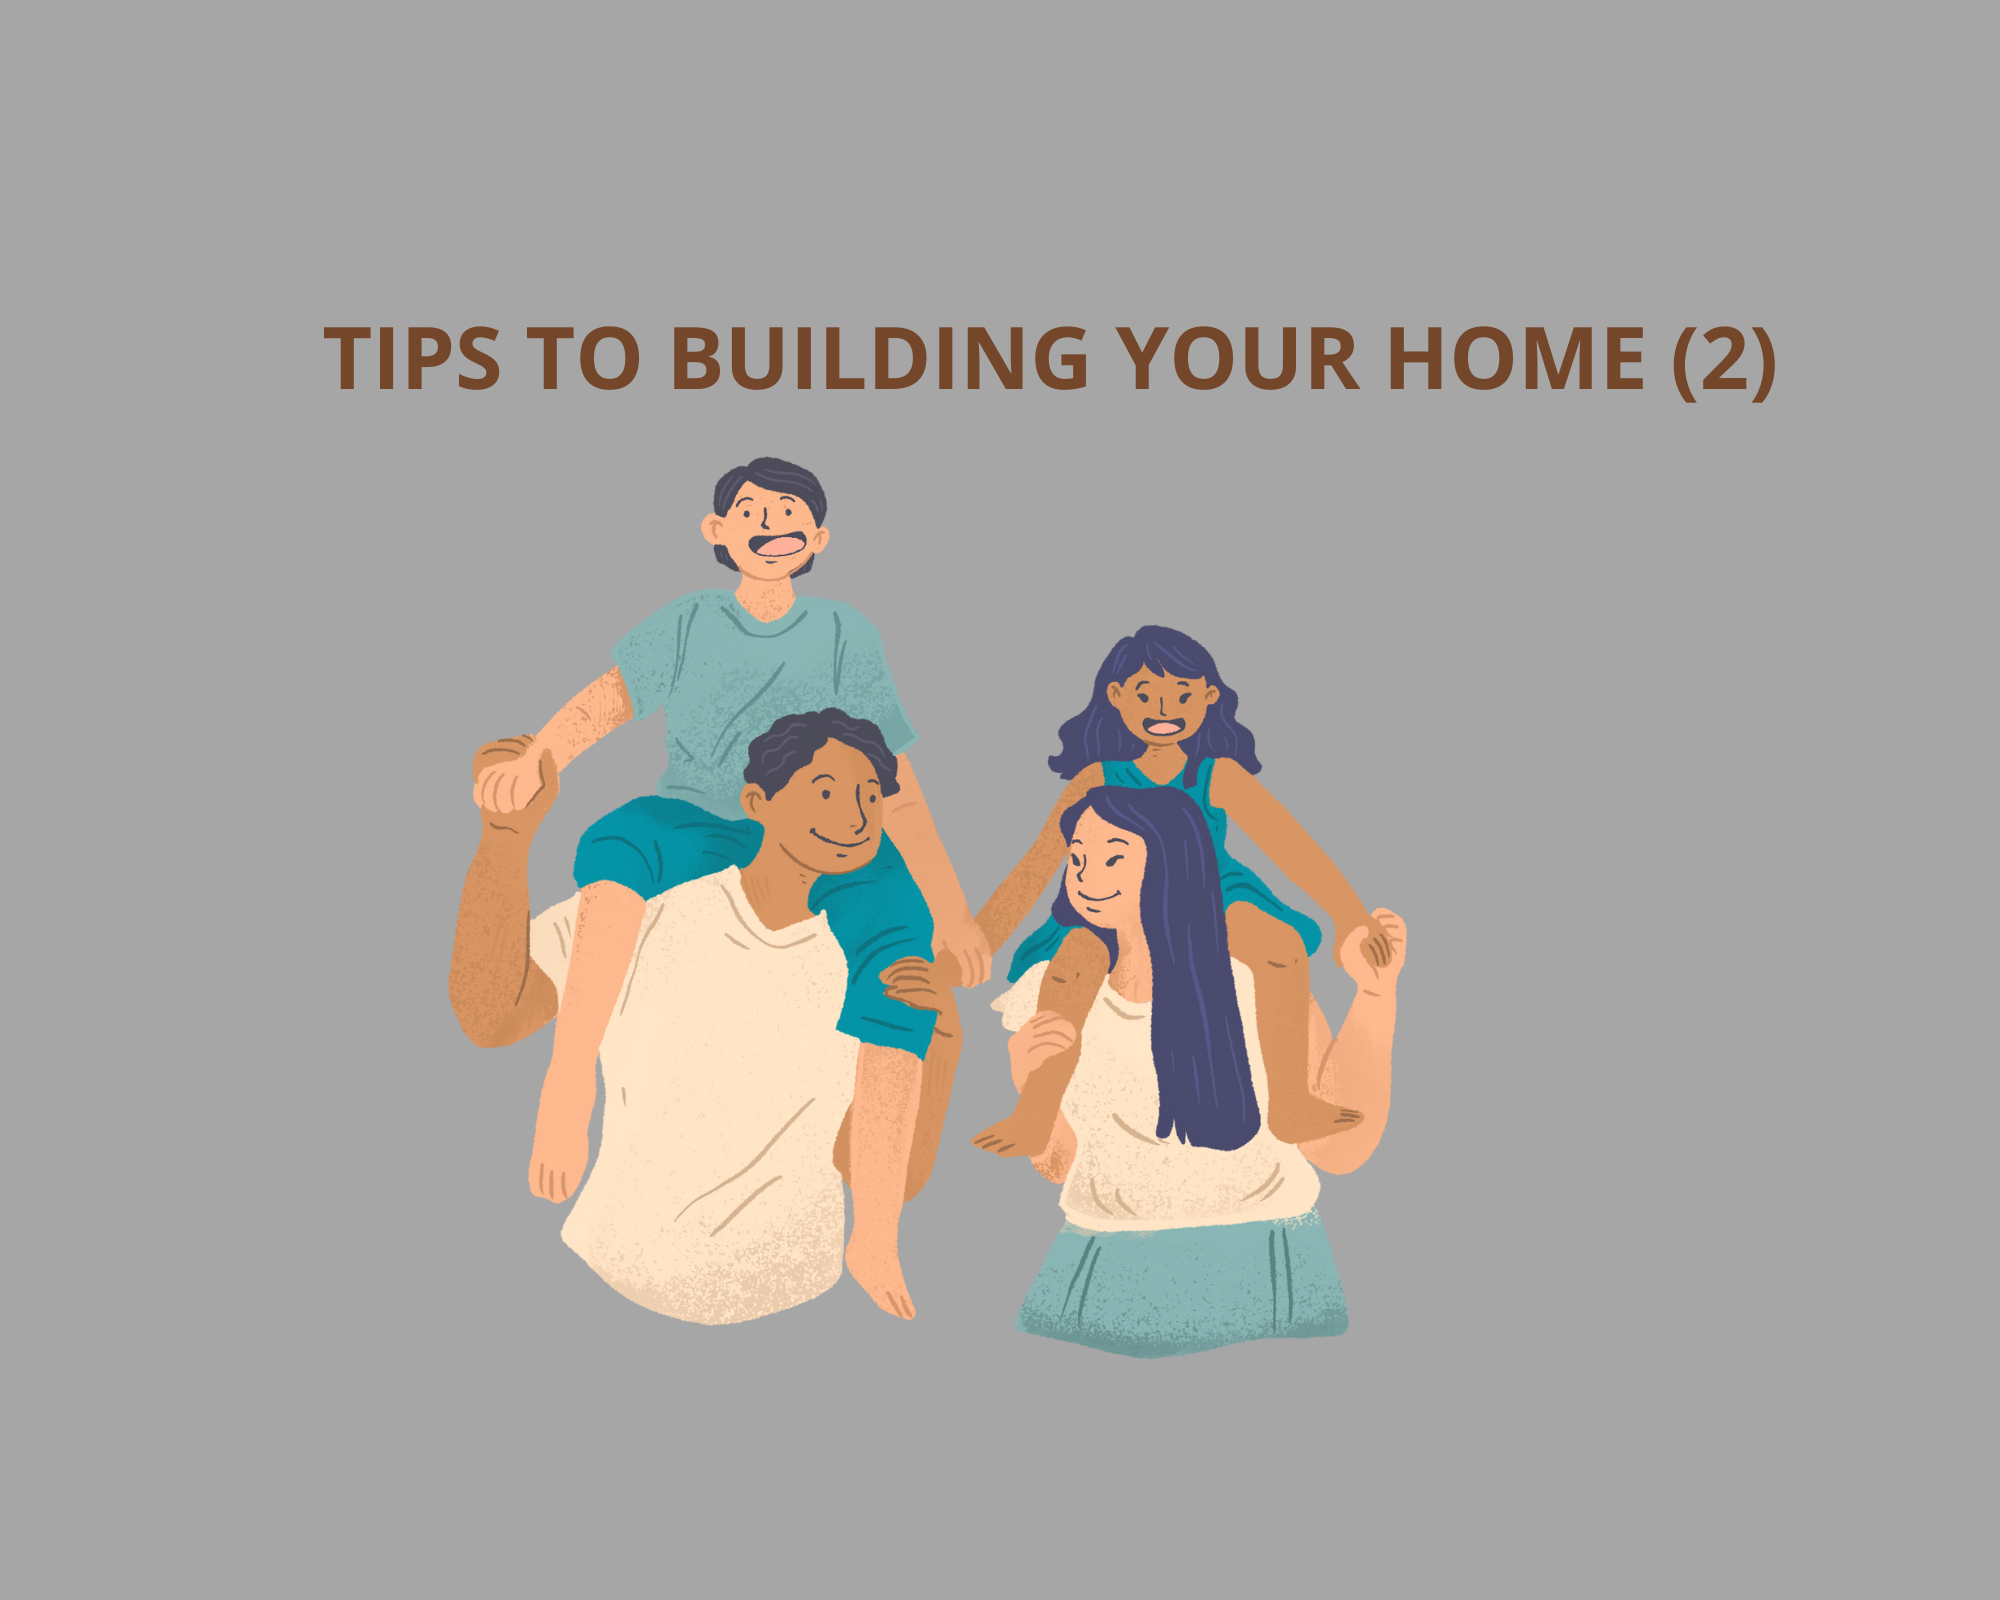 TIPS TO BUILDING YOUR HOME (2)